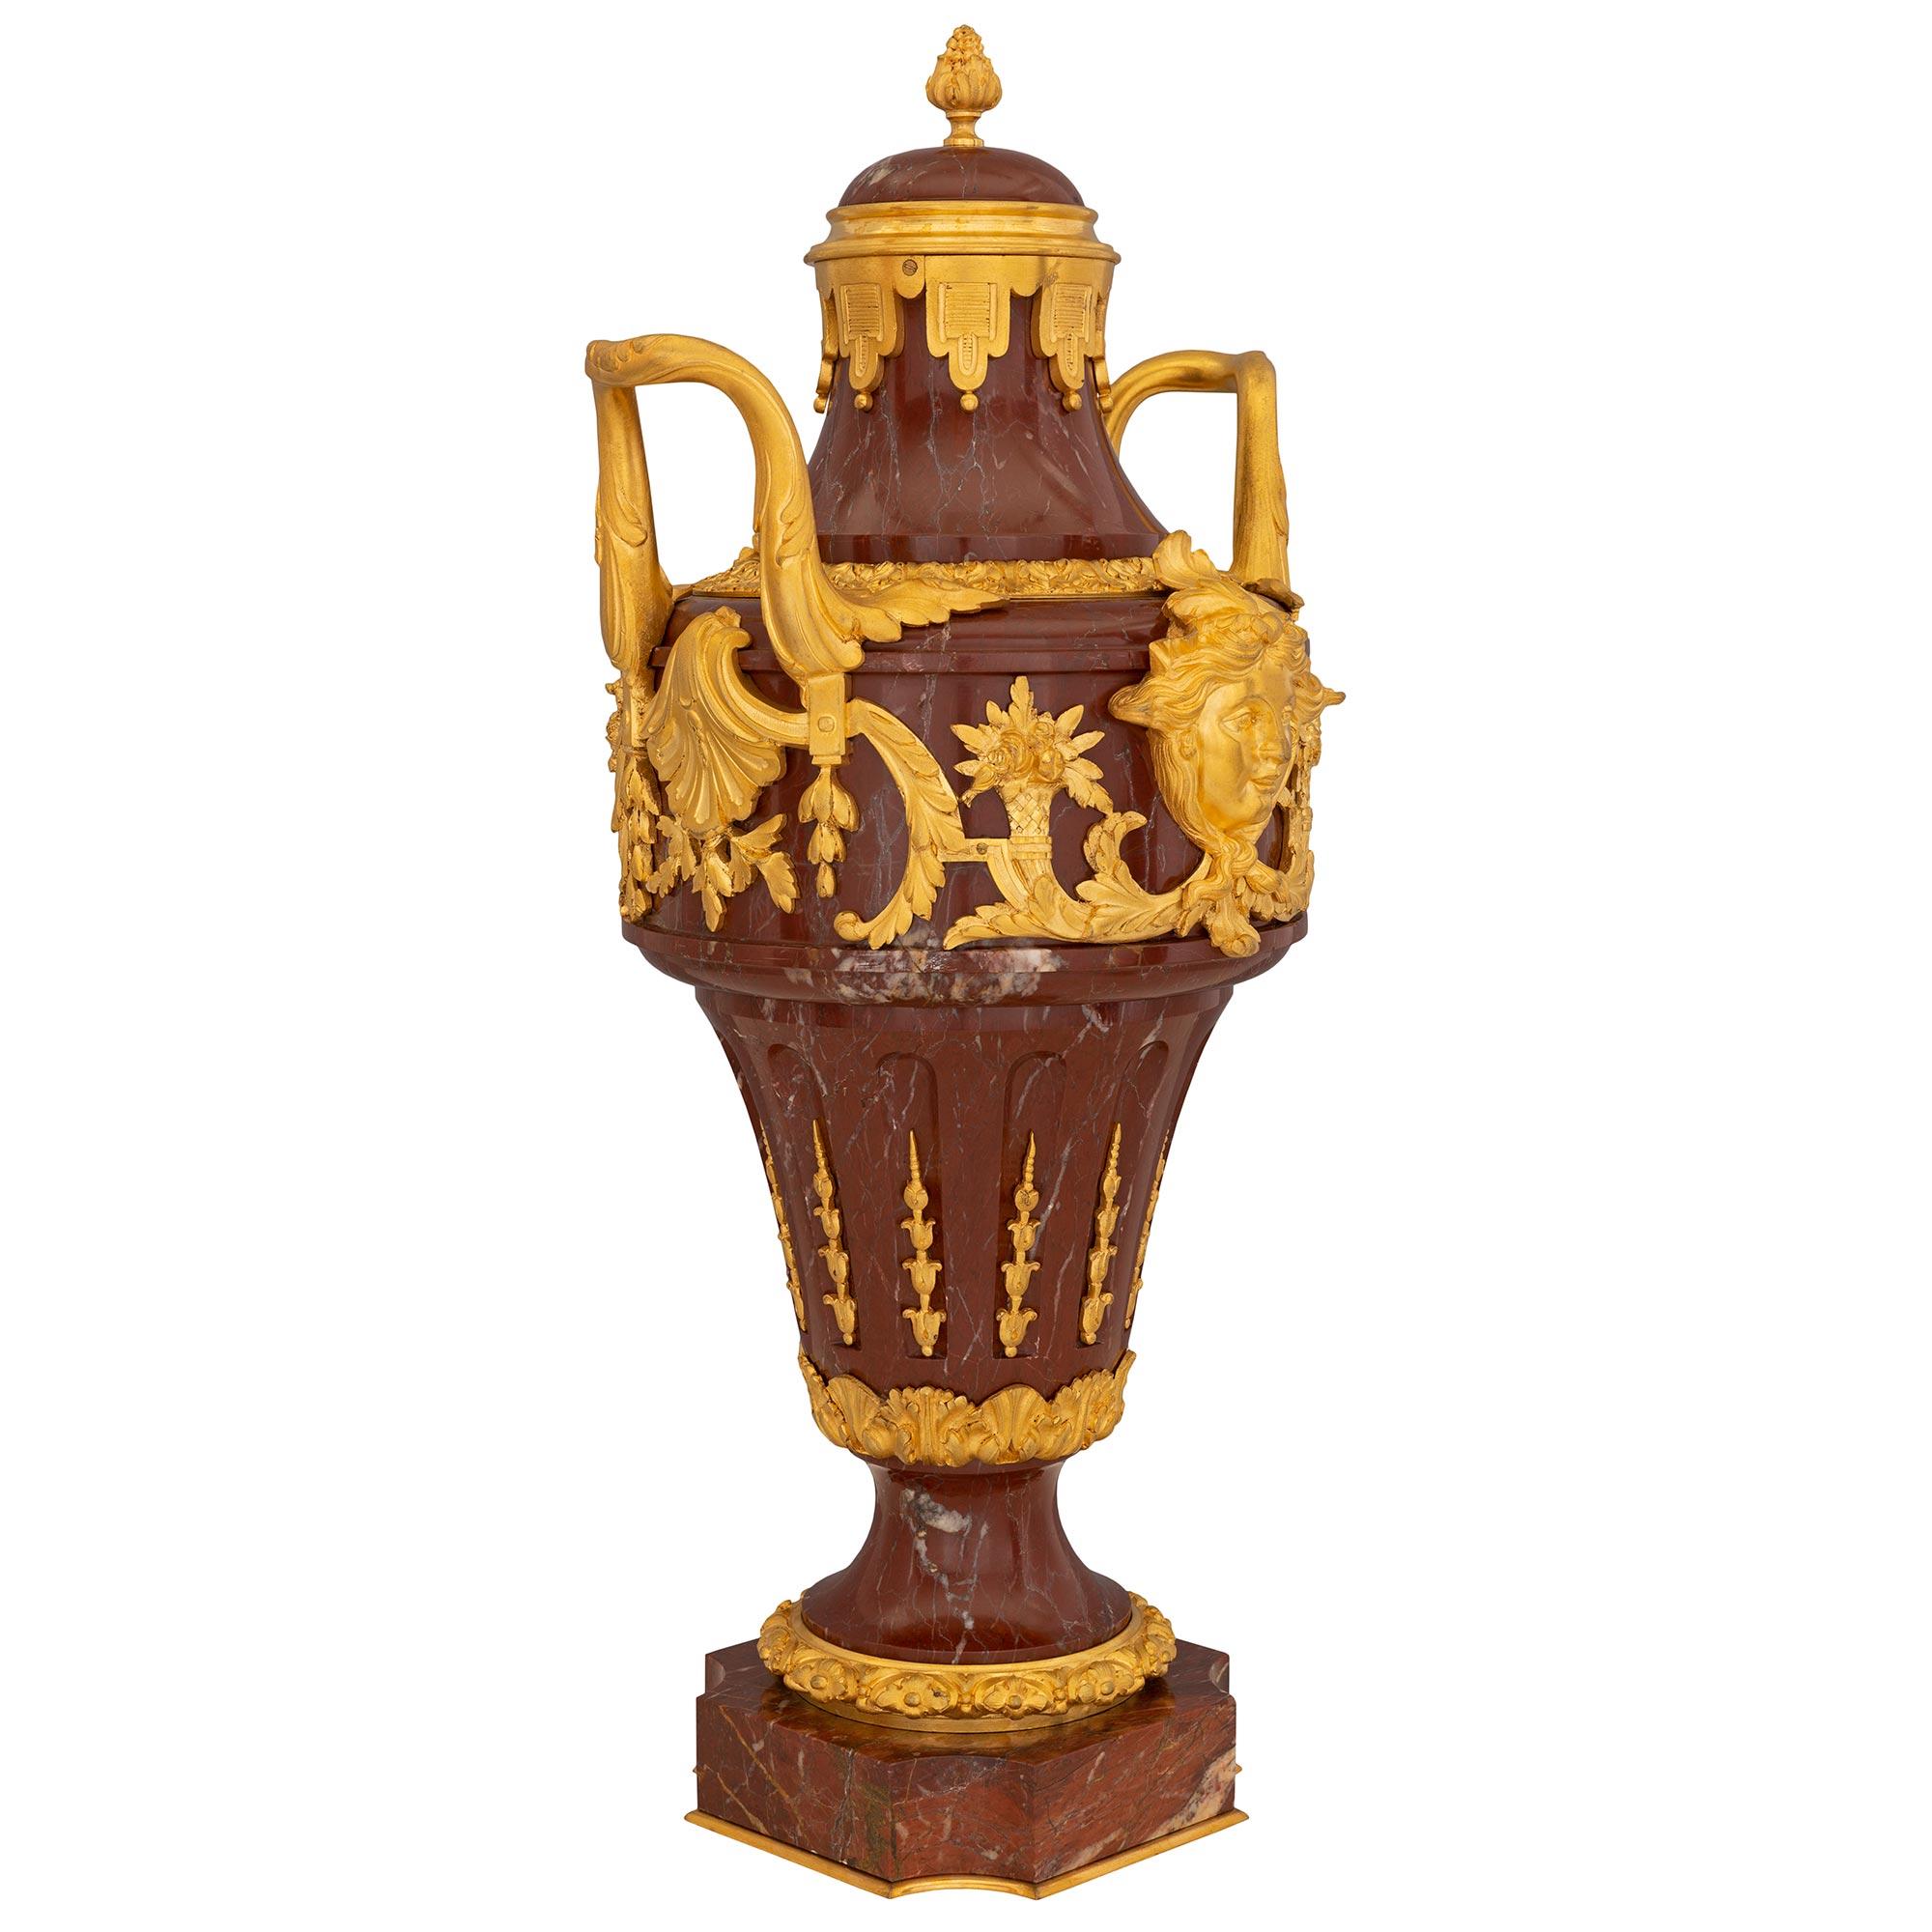 A stunning pair of French 19th century Louis XVI st. Rouge marble and ormolu urns. Each urn is raised by a square base with concave corners and a decorative bottom ormolu fillet. The socle pedestal is decorated with a floral ormolu band and a top